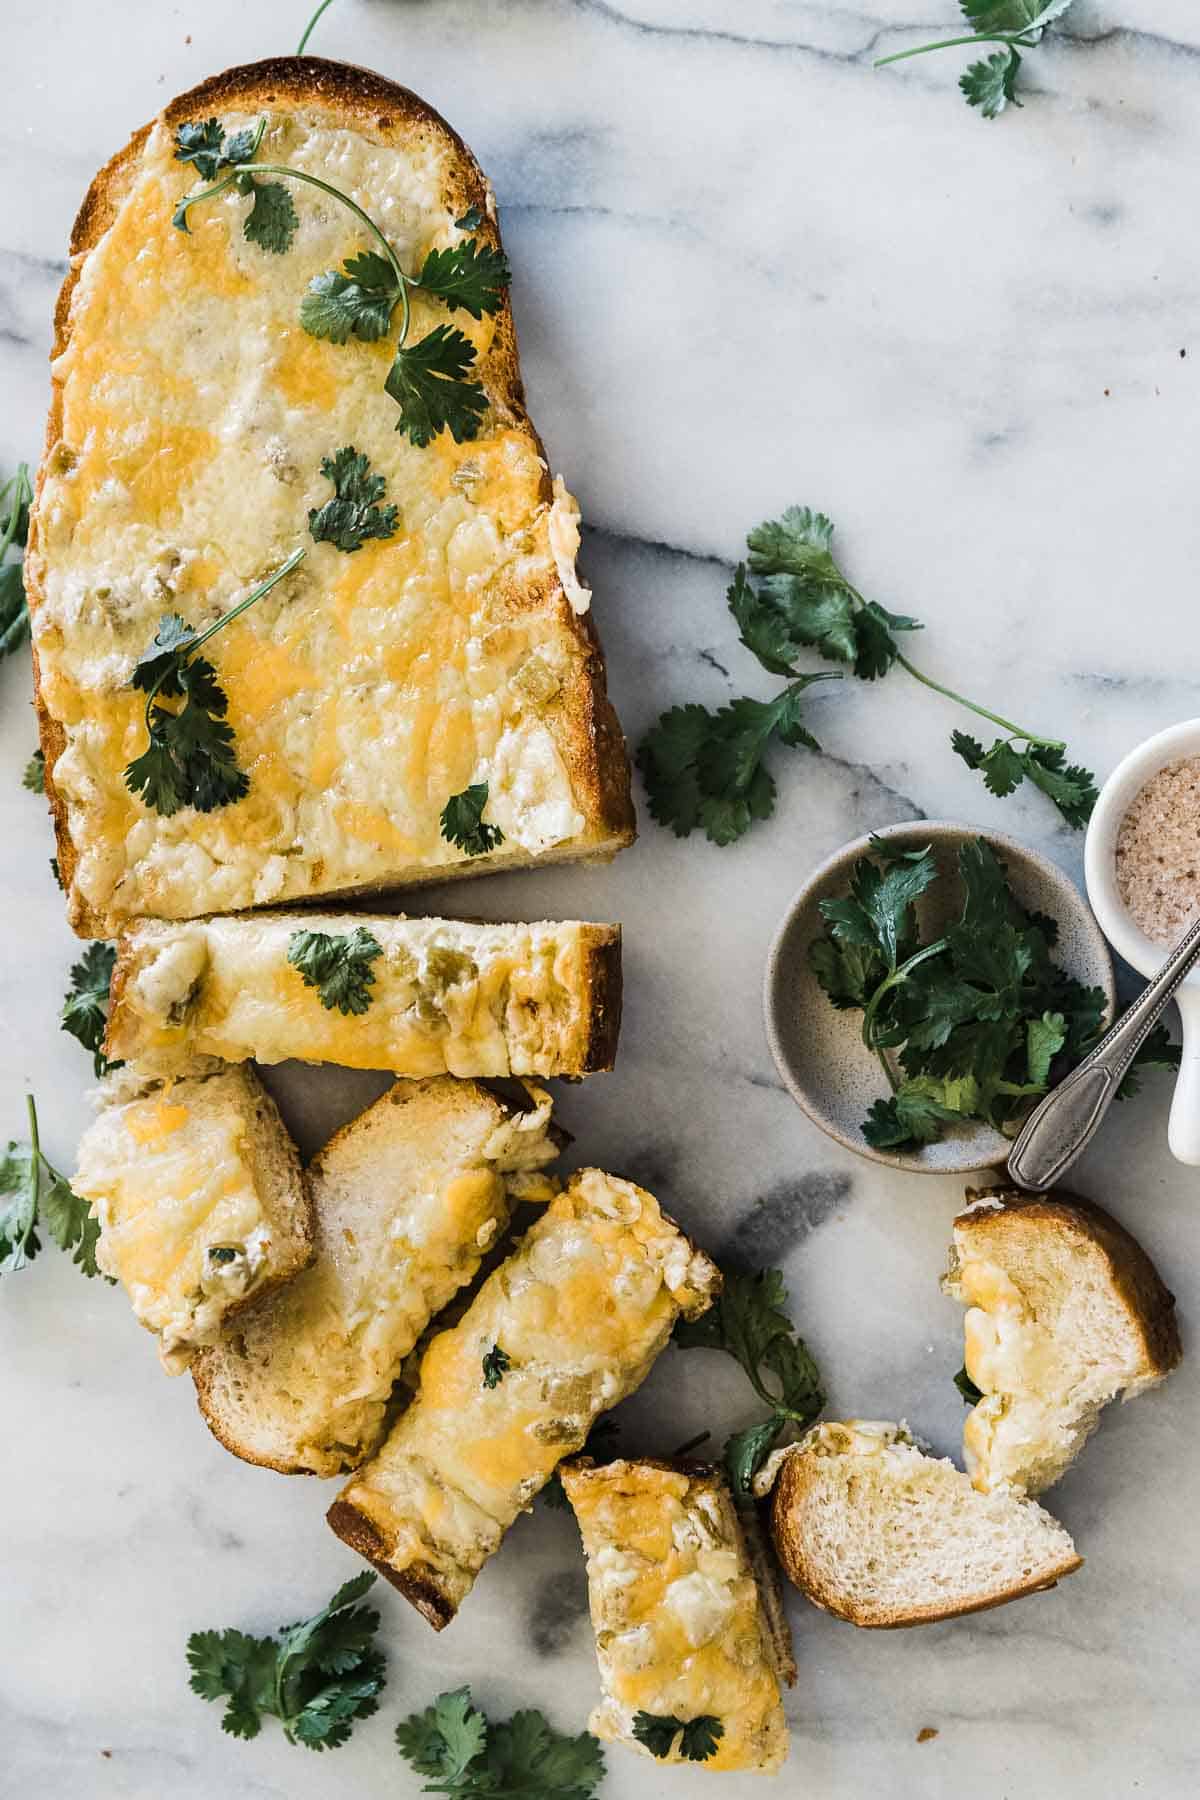 Chili cheese toast sliced and laid on a marble counter. There are small bowls of salt and cilantro to the side.